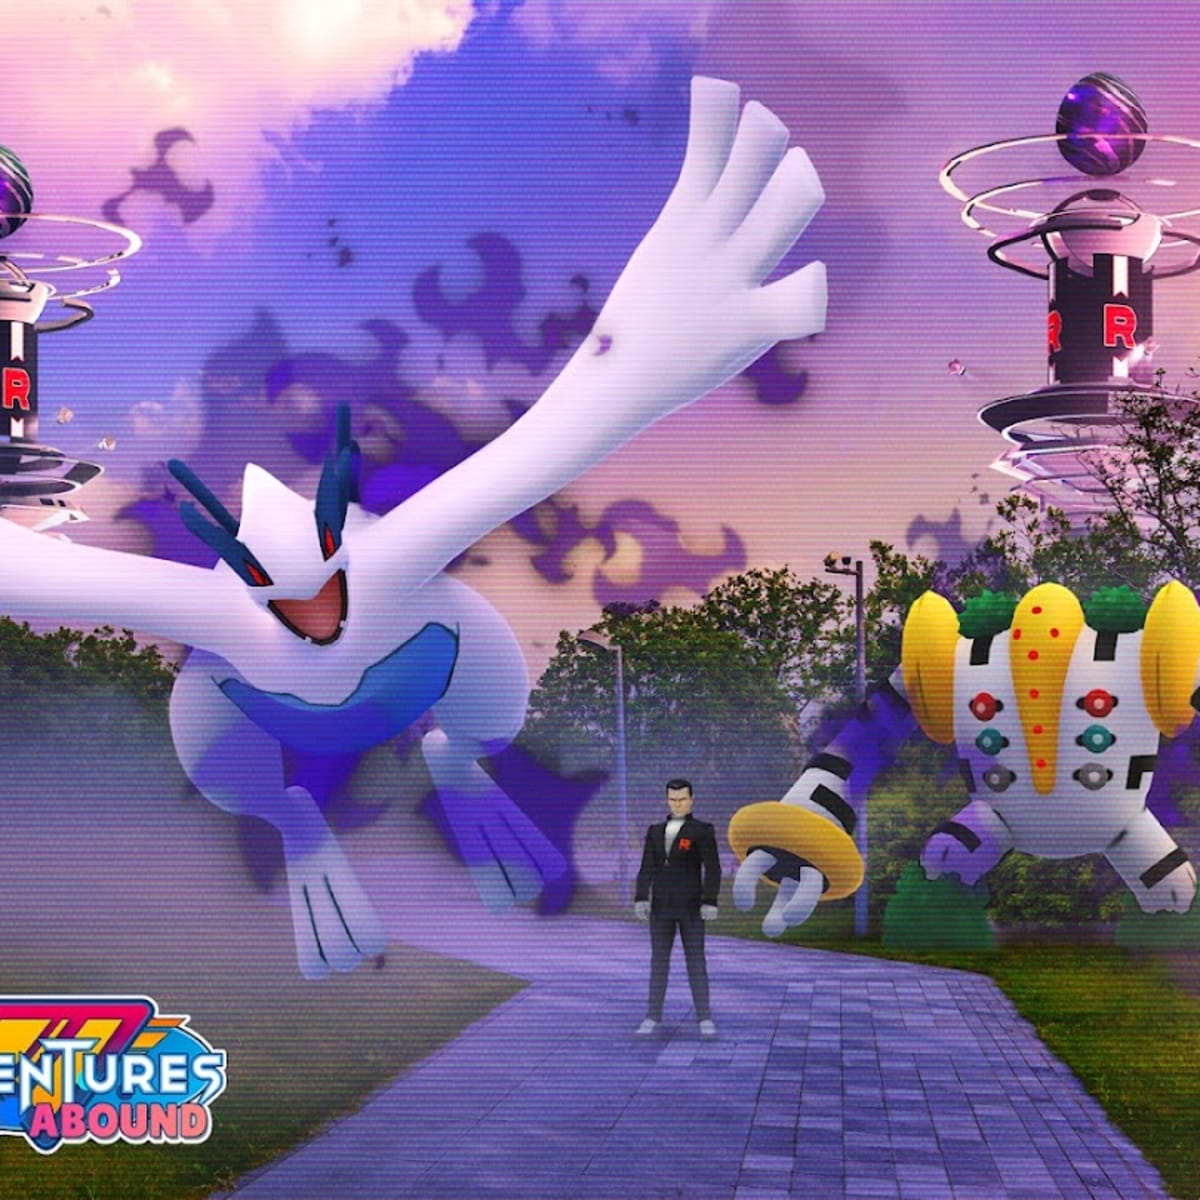 Pokémon GO - Trainers, May just got even more Legendary. The Rainbow  Pokémon Ho-Oh returns to Pokémon GO on May 19! Take on this powerful Fire-  and Flying-type in Raid Battles across